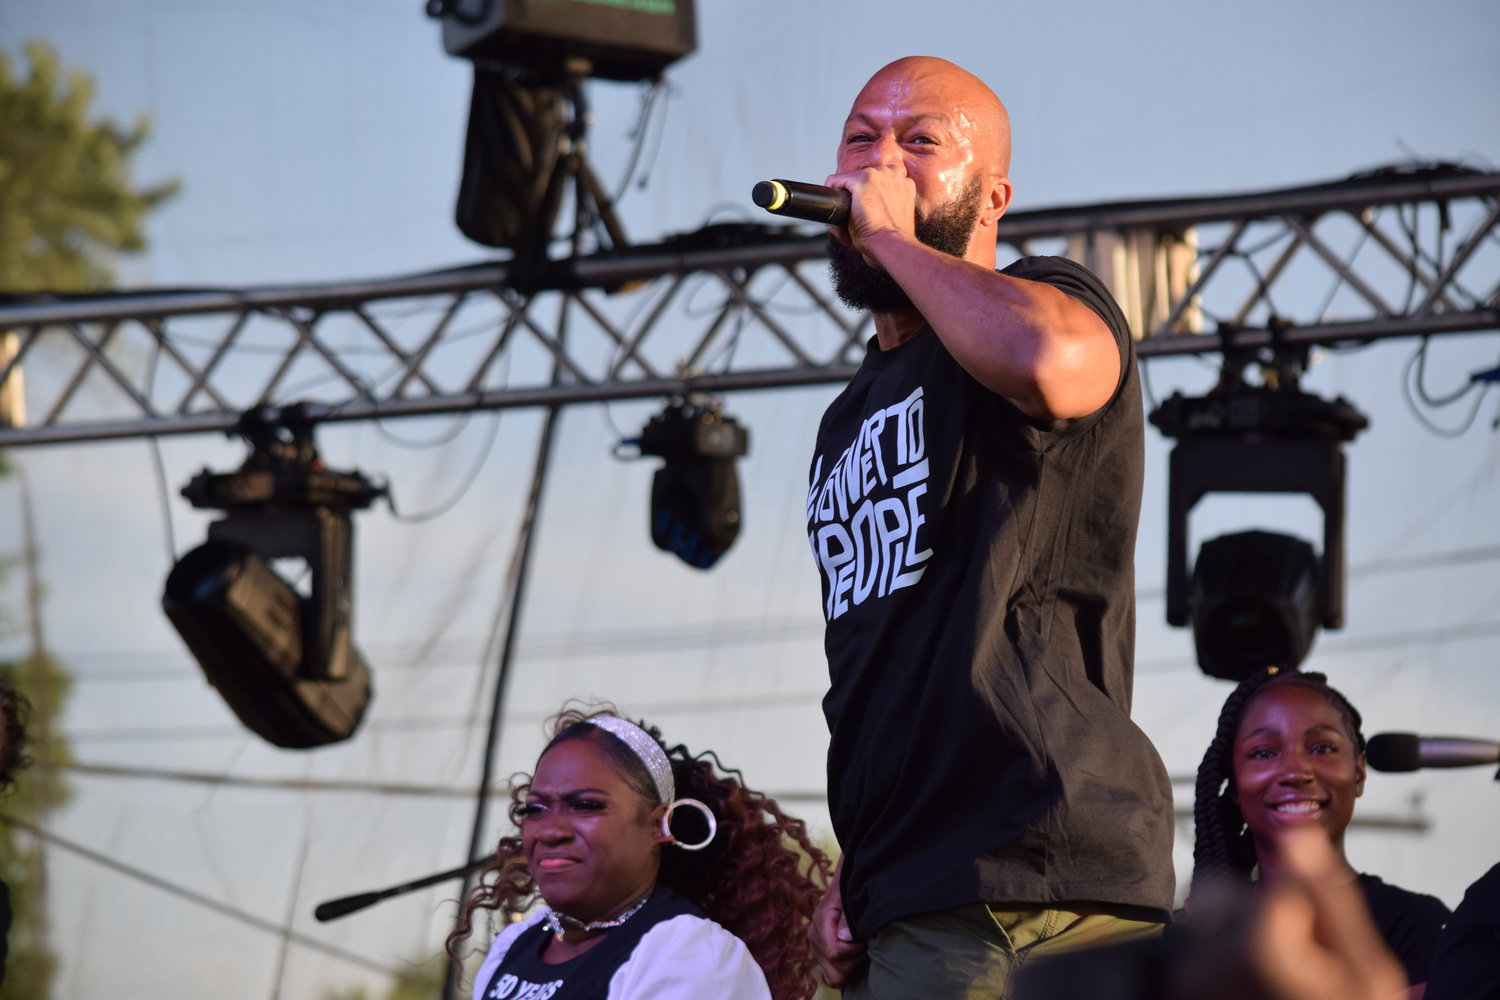 Surprise special guest Common joins Sounds of Blackness on stage.
“I'm here because I saw Emmett Till's mom stand in power, even though she was in the most pain you could ever feel, she stood in power. She stood in peace and in love and showin' people what children of God are like,” he said. Common said the names of people whose lives were taken by injustice, which prompted others in the audience to call out names. “It’s such a list it hurts your heart to say it.”
He then dedicated the next song to them and their families, and with Sounds of Blackness offered a riveting performance of the Academy Award Winning Song, “Glory.”